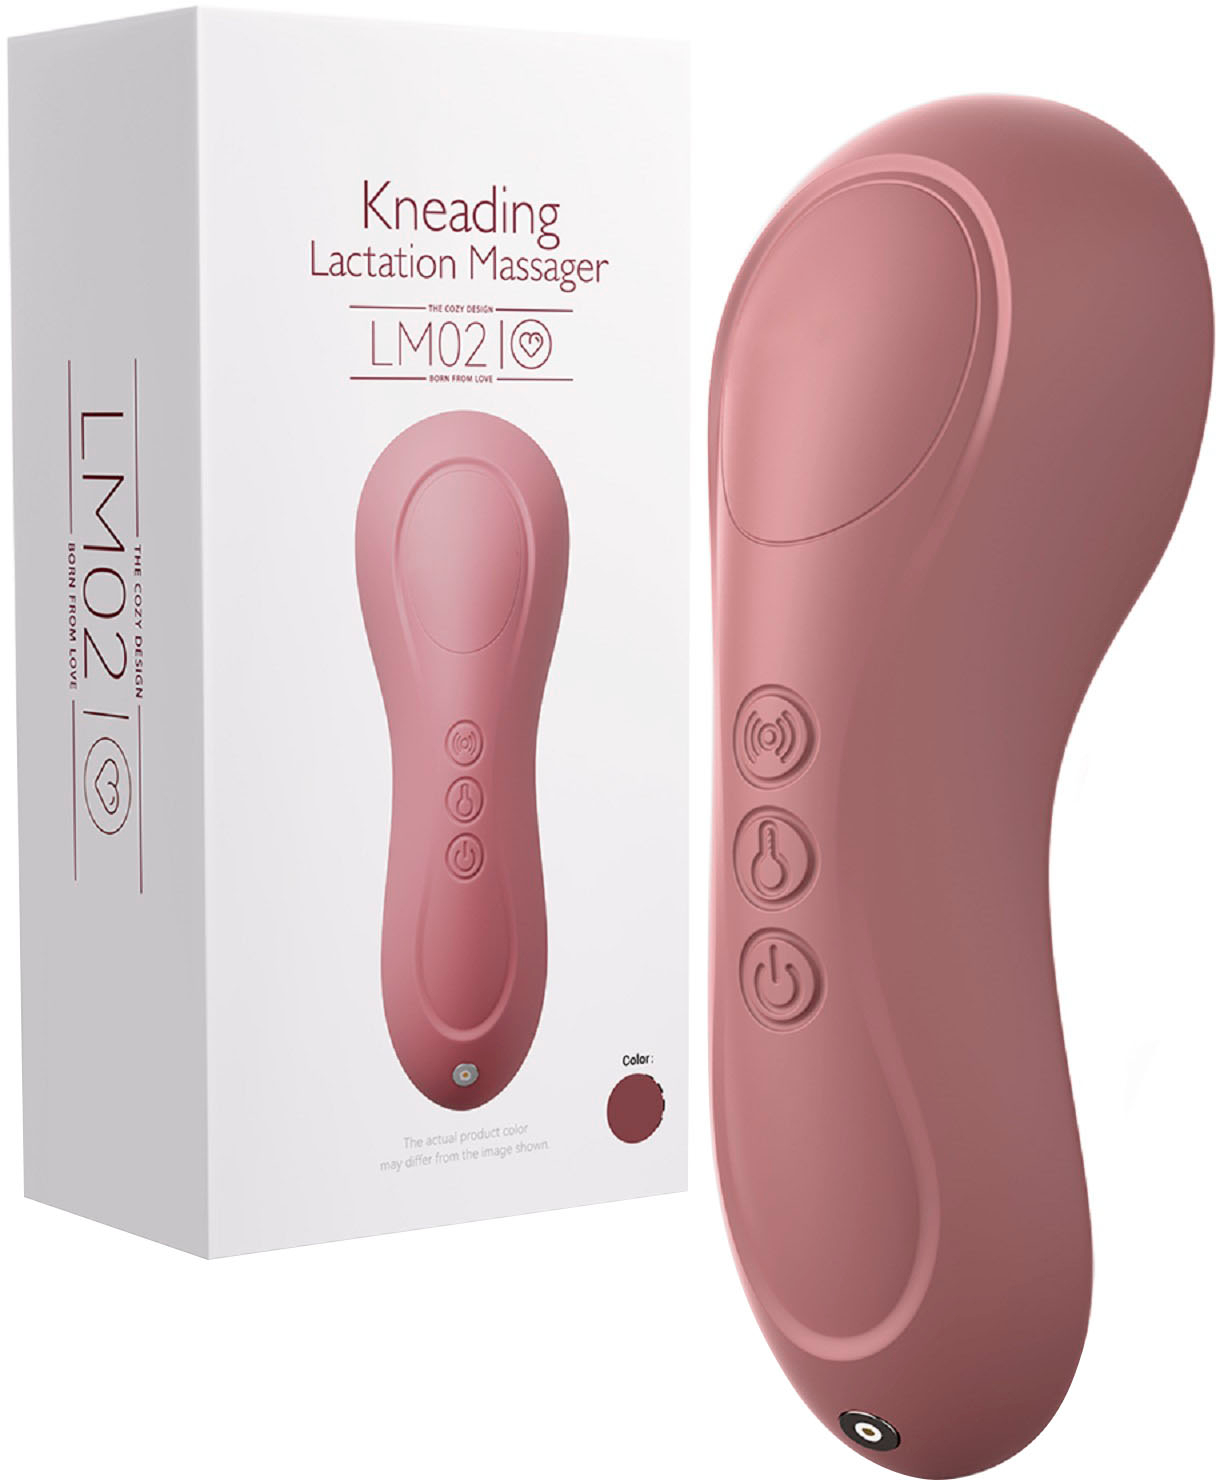 Momcozy Double 2-in-1 Warming Vibration Lactation Massager Rose  MCMLM02-GE00BA-LY - Best Buy